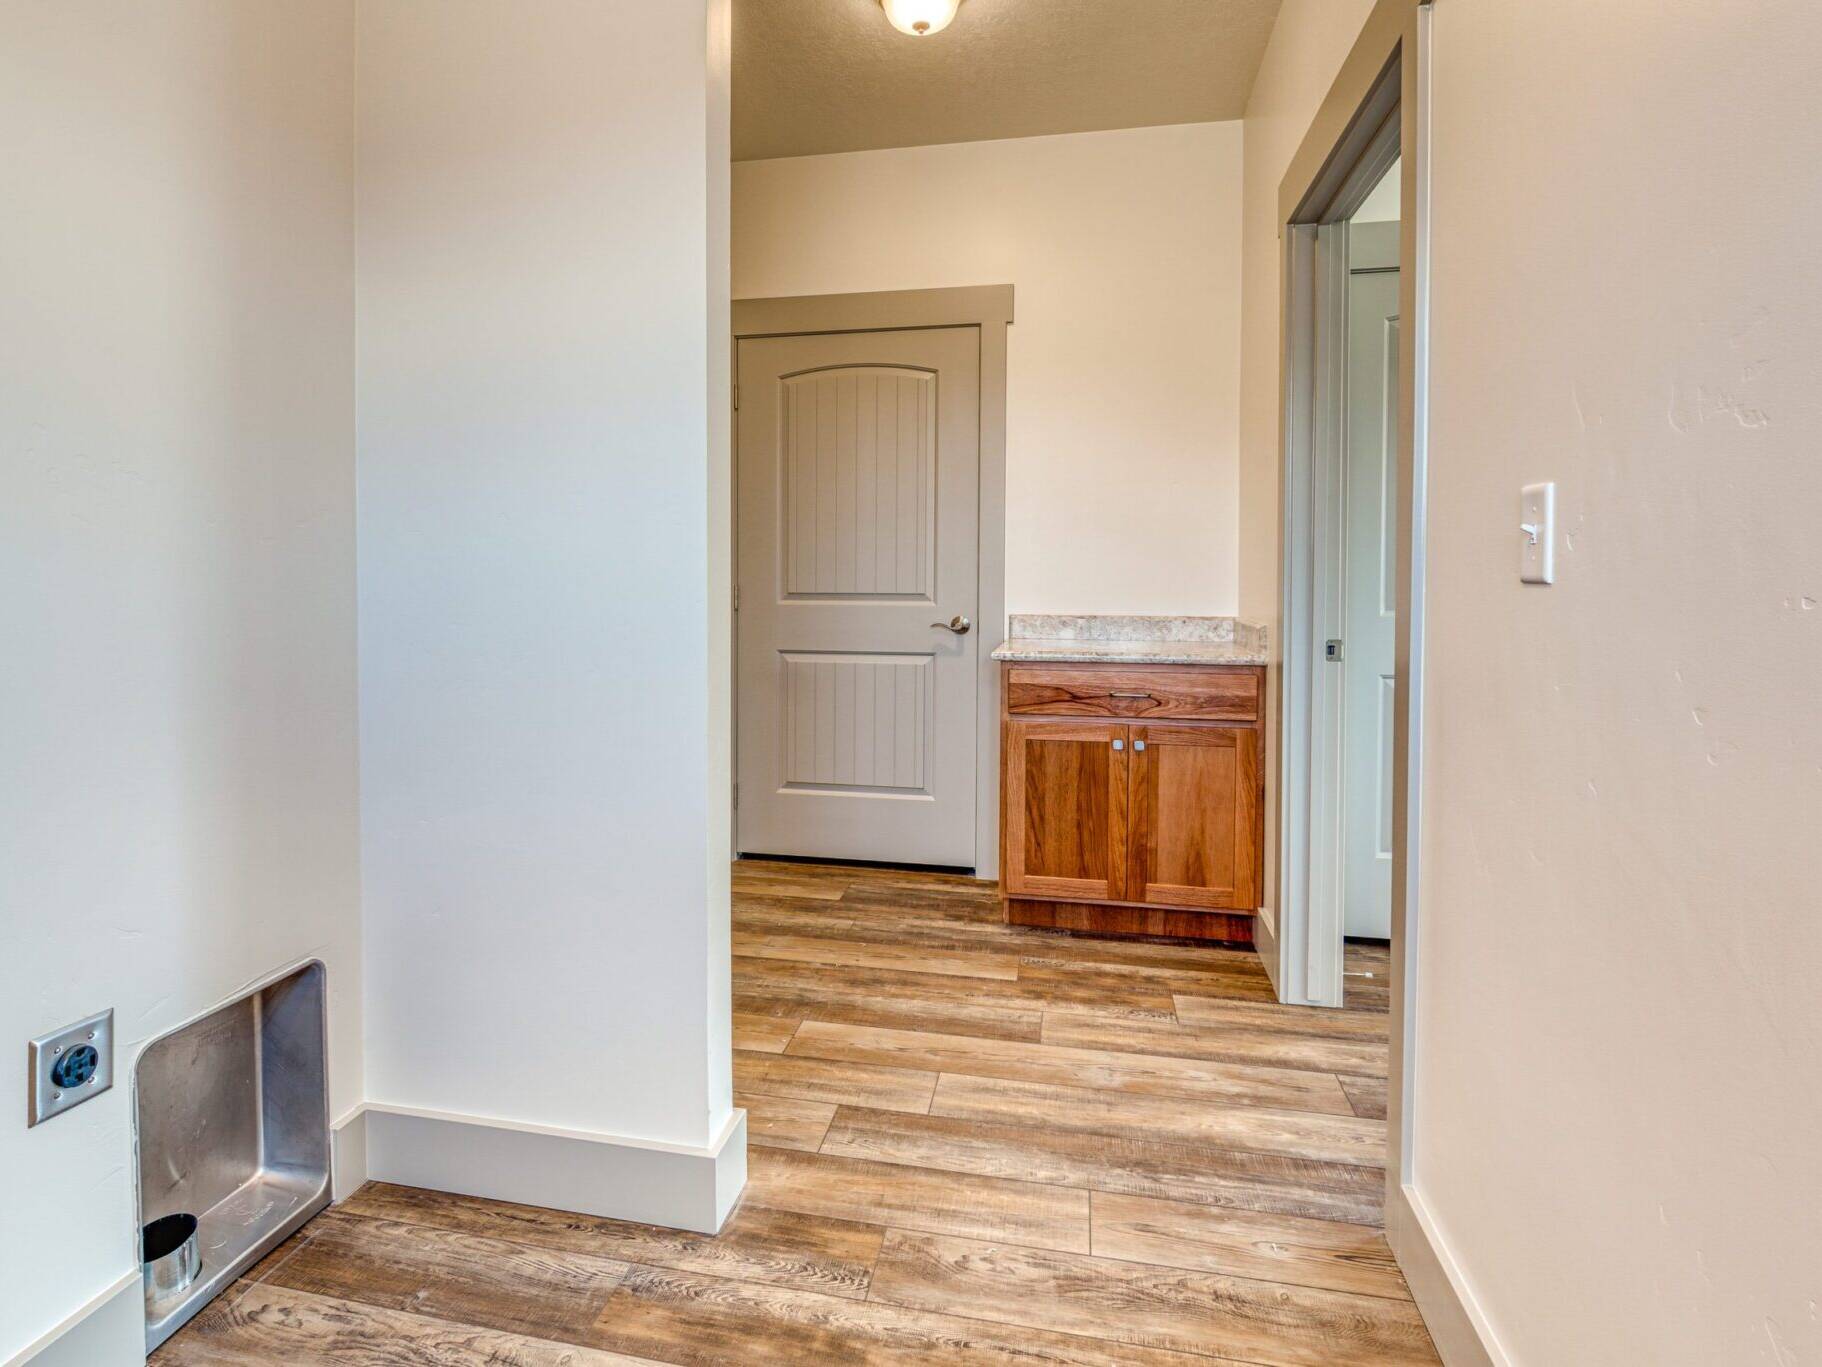 Laundry/rear foyer in the Country Cottage model home - built by Big Sky Builders in Hamilton, MT